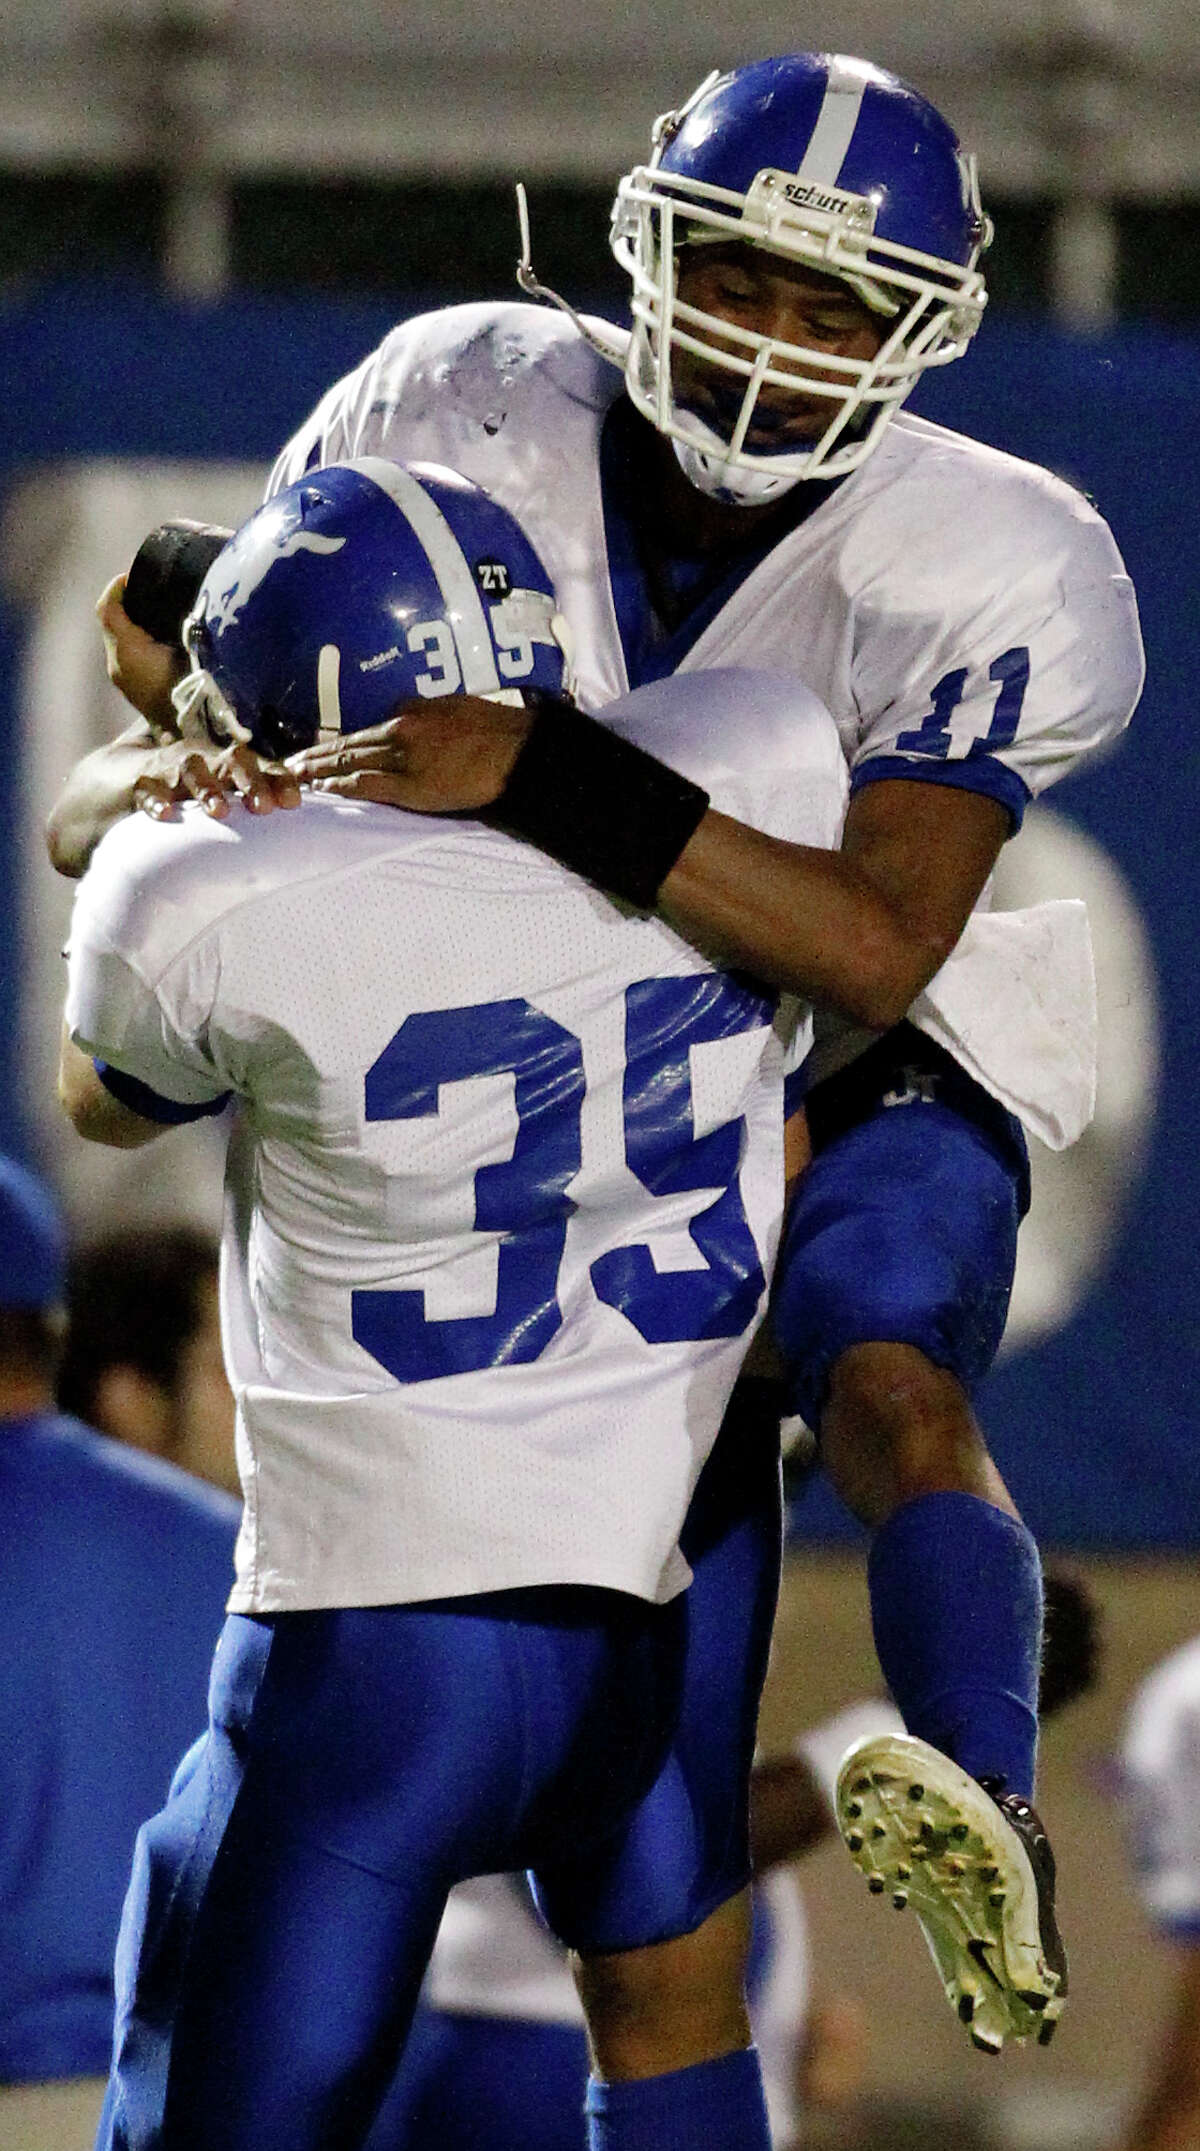 Jay's Josh Reynolds (11) celebrates with kicker Aaron Haston (35) after Reynolds recovered an onside kick during game action against O'Connor at Farris Stadium on Oct. 15, 2011. Jay won 34-27 in overtime.